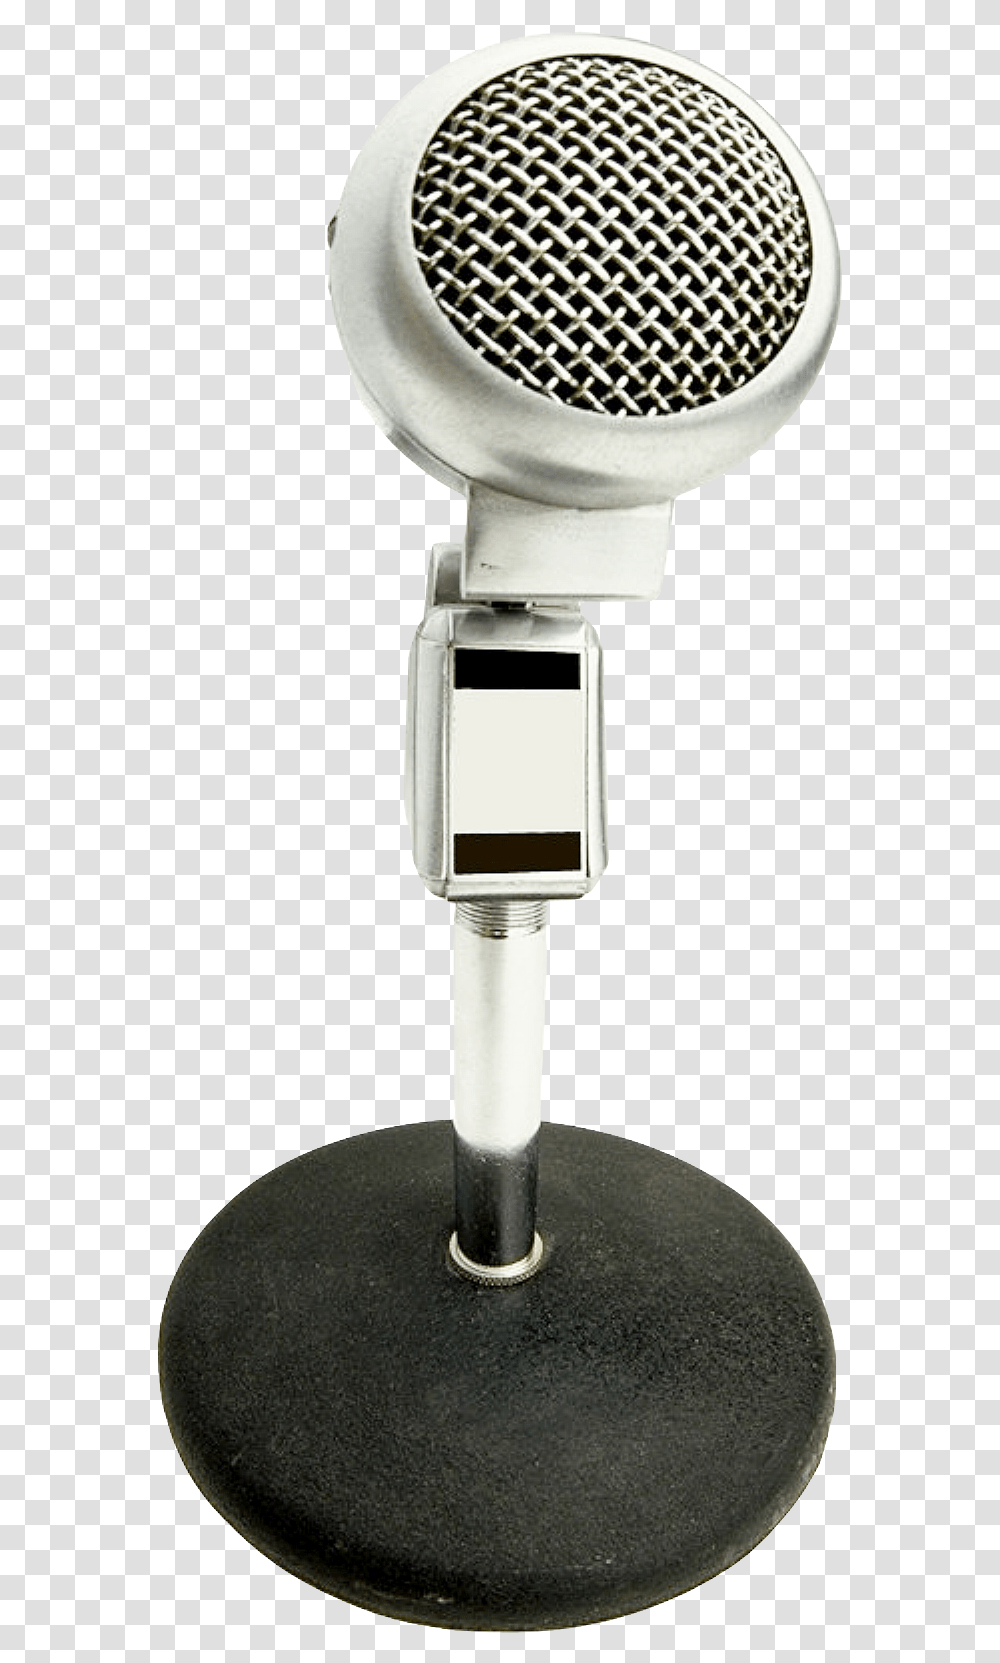 Download Microphone Image For Free Stand, Blow Dryer, Appliance, Hair Drier, Parking Lot Transparent Png